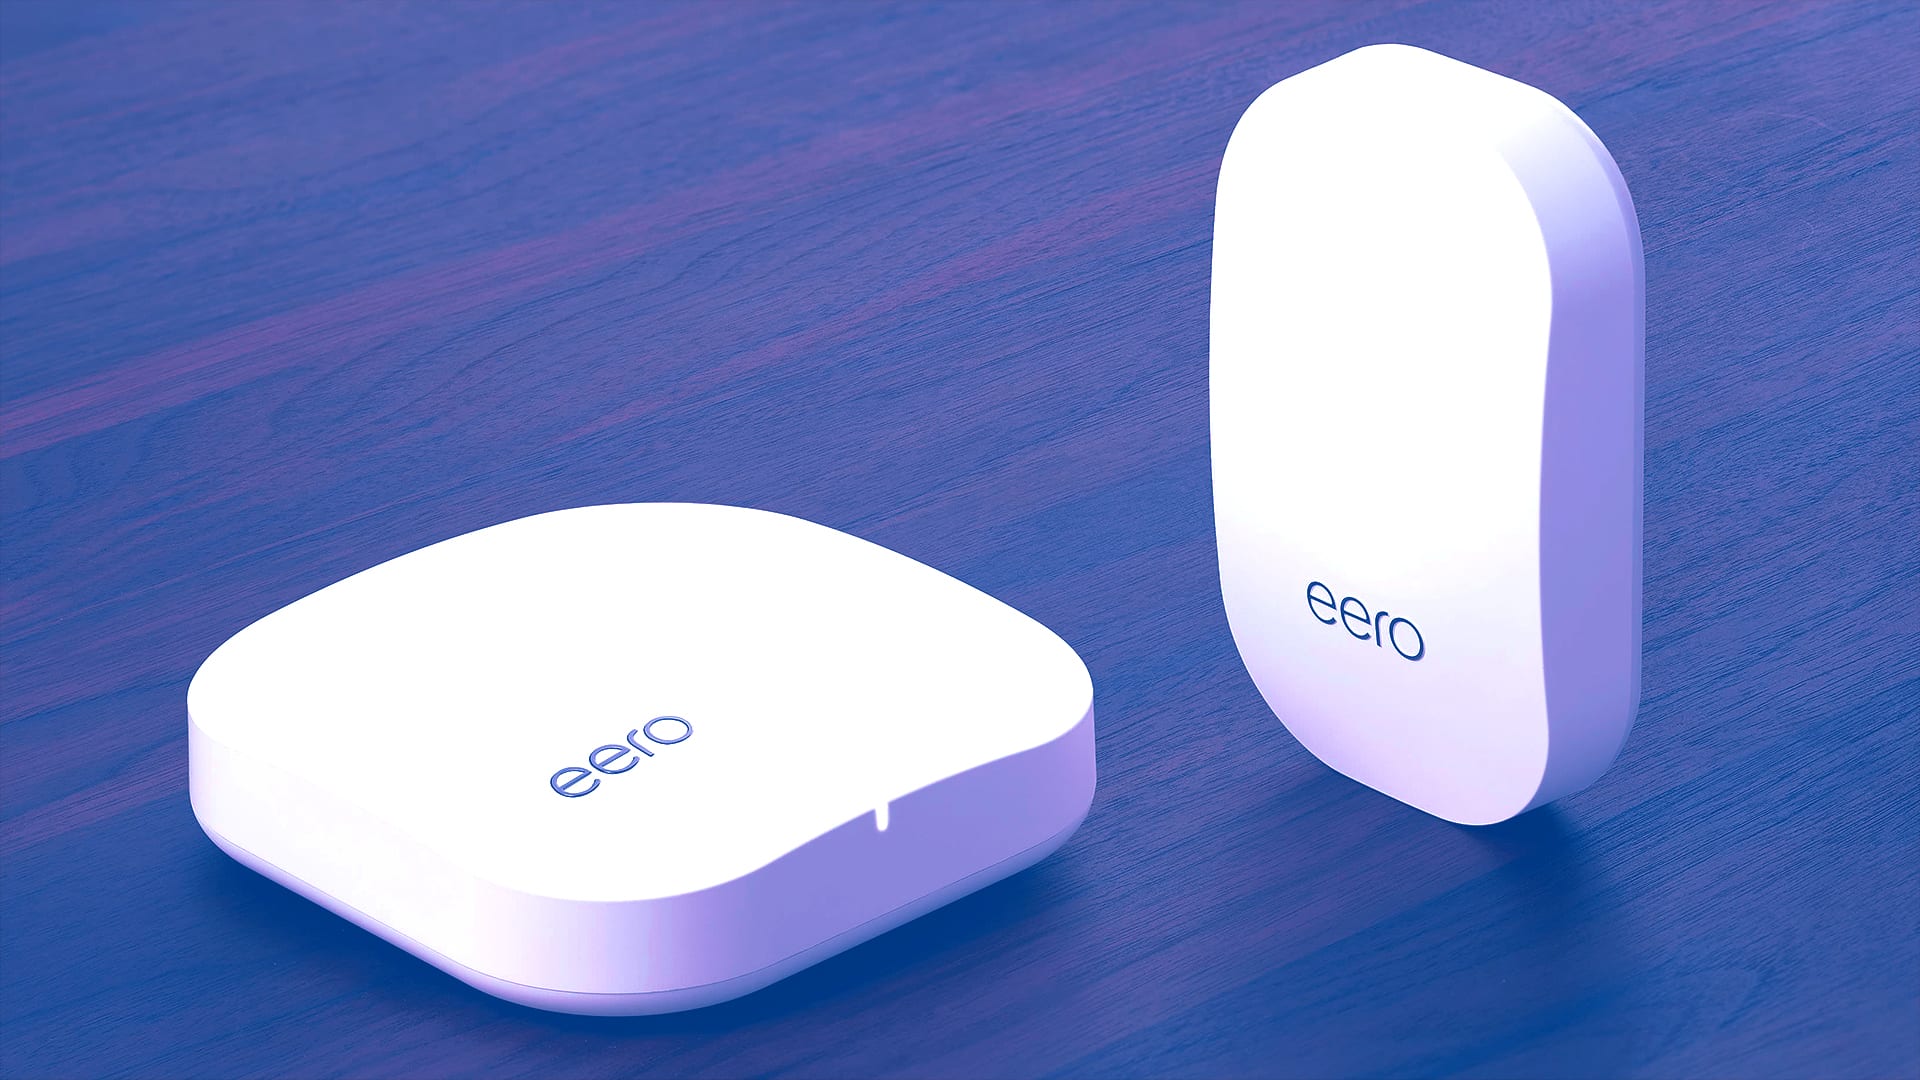 Eero had grand smart home aspirations. Now Amazon owns them all